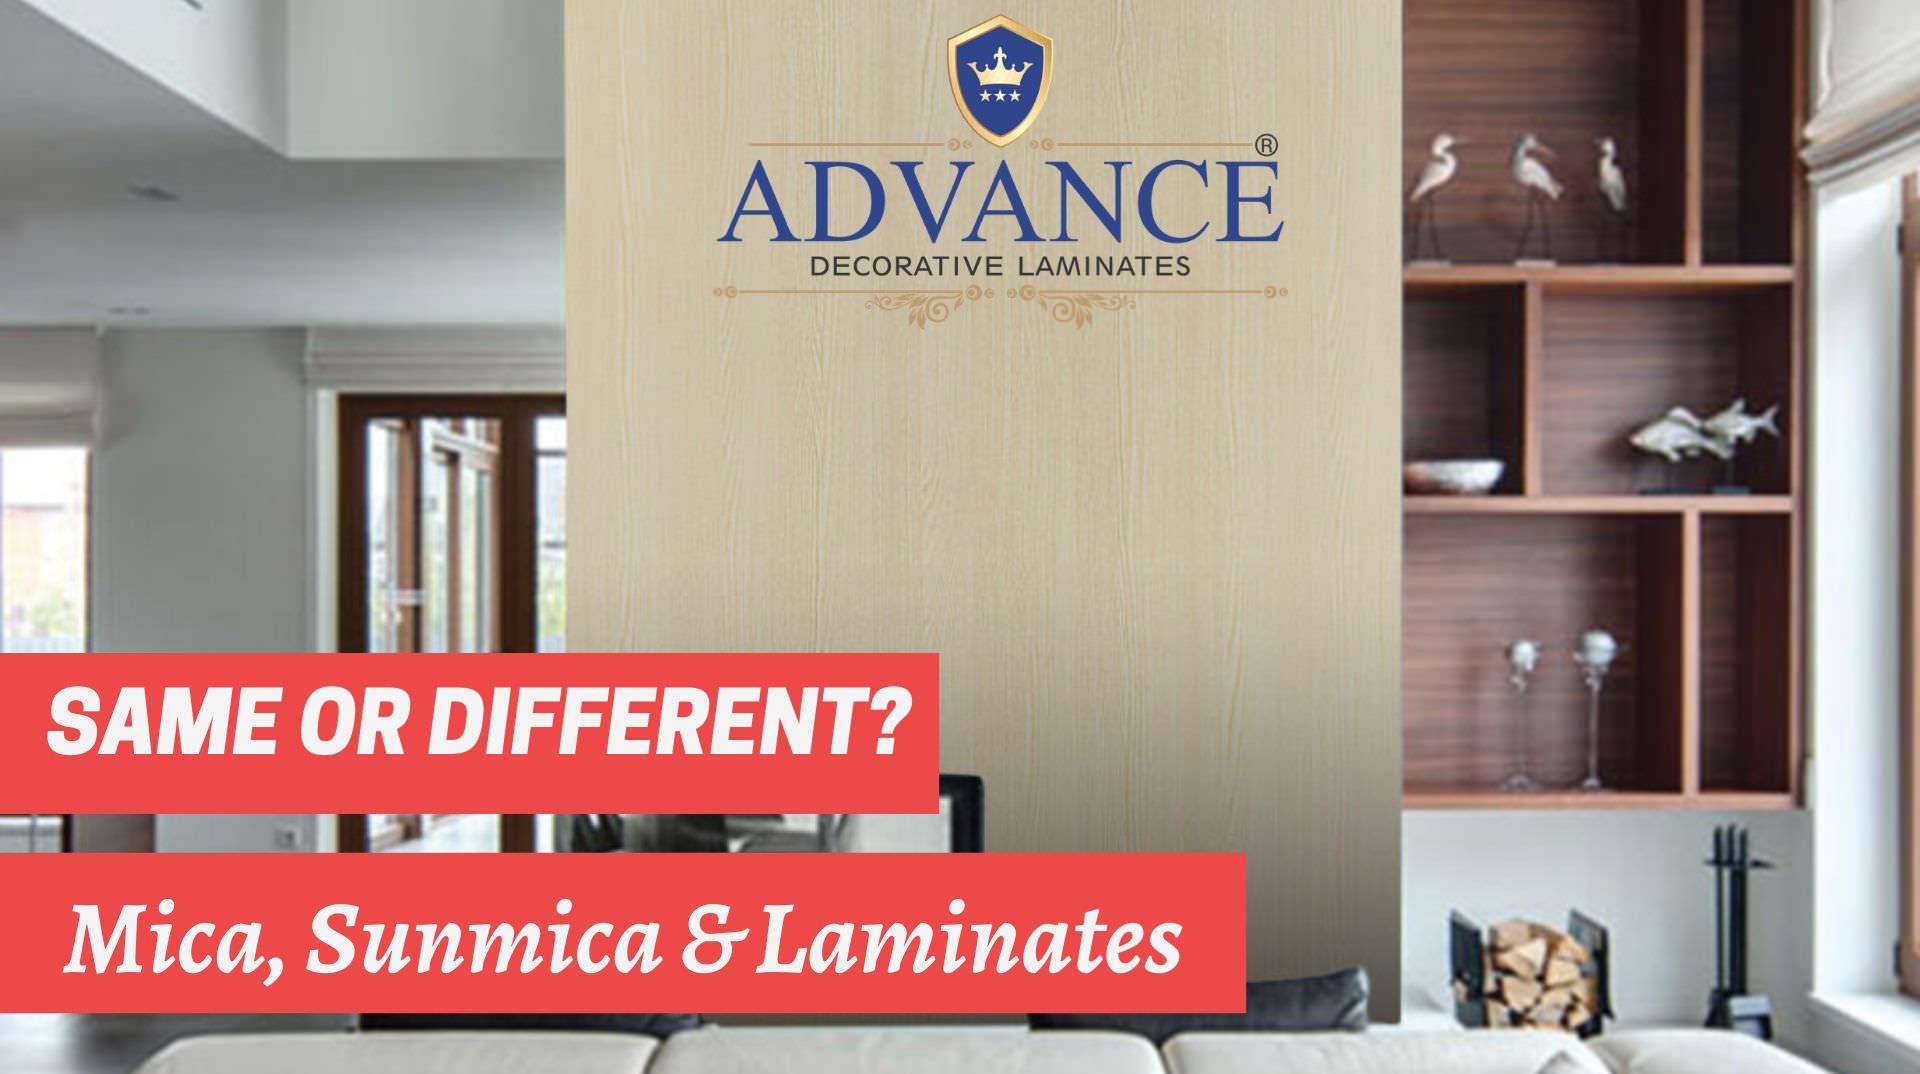 Are Mica, Sunmica And Laminates Same Or Different? Everything You Need To Know